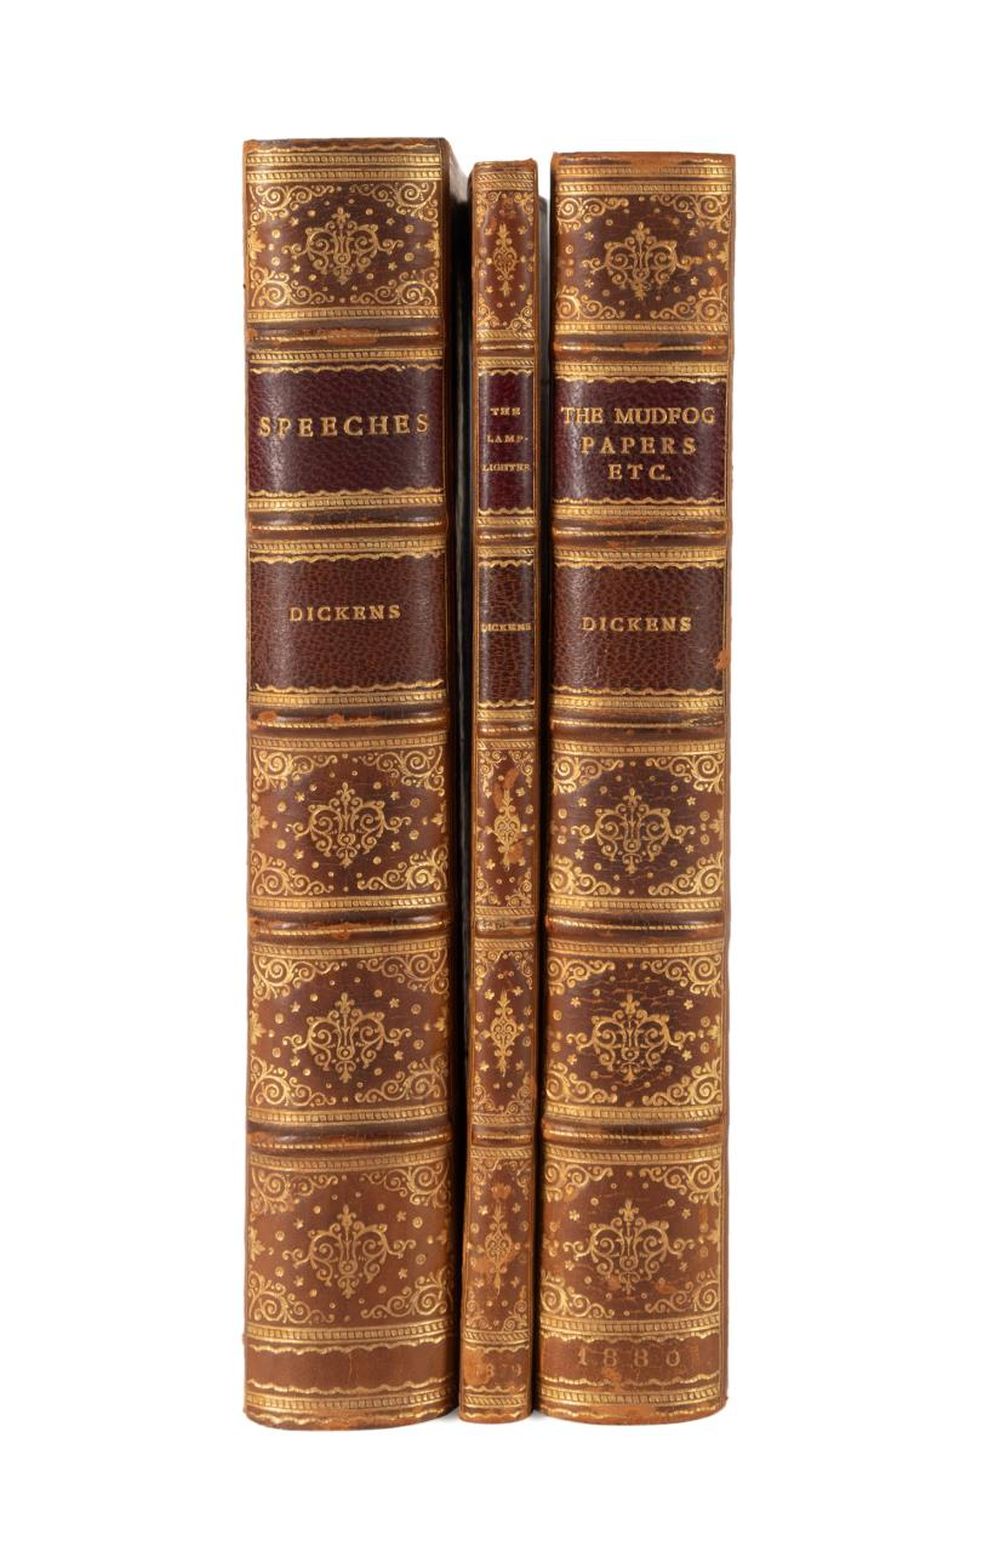 3VOL CHARLES DICKENS FINELY BOUND 3cd530